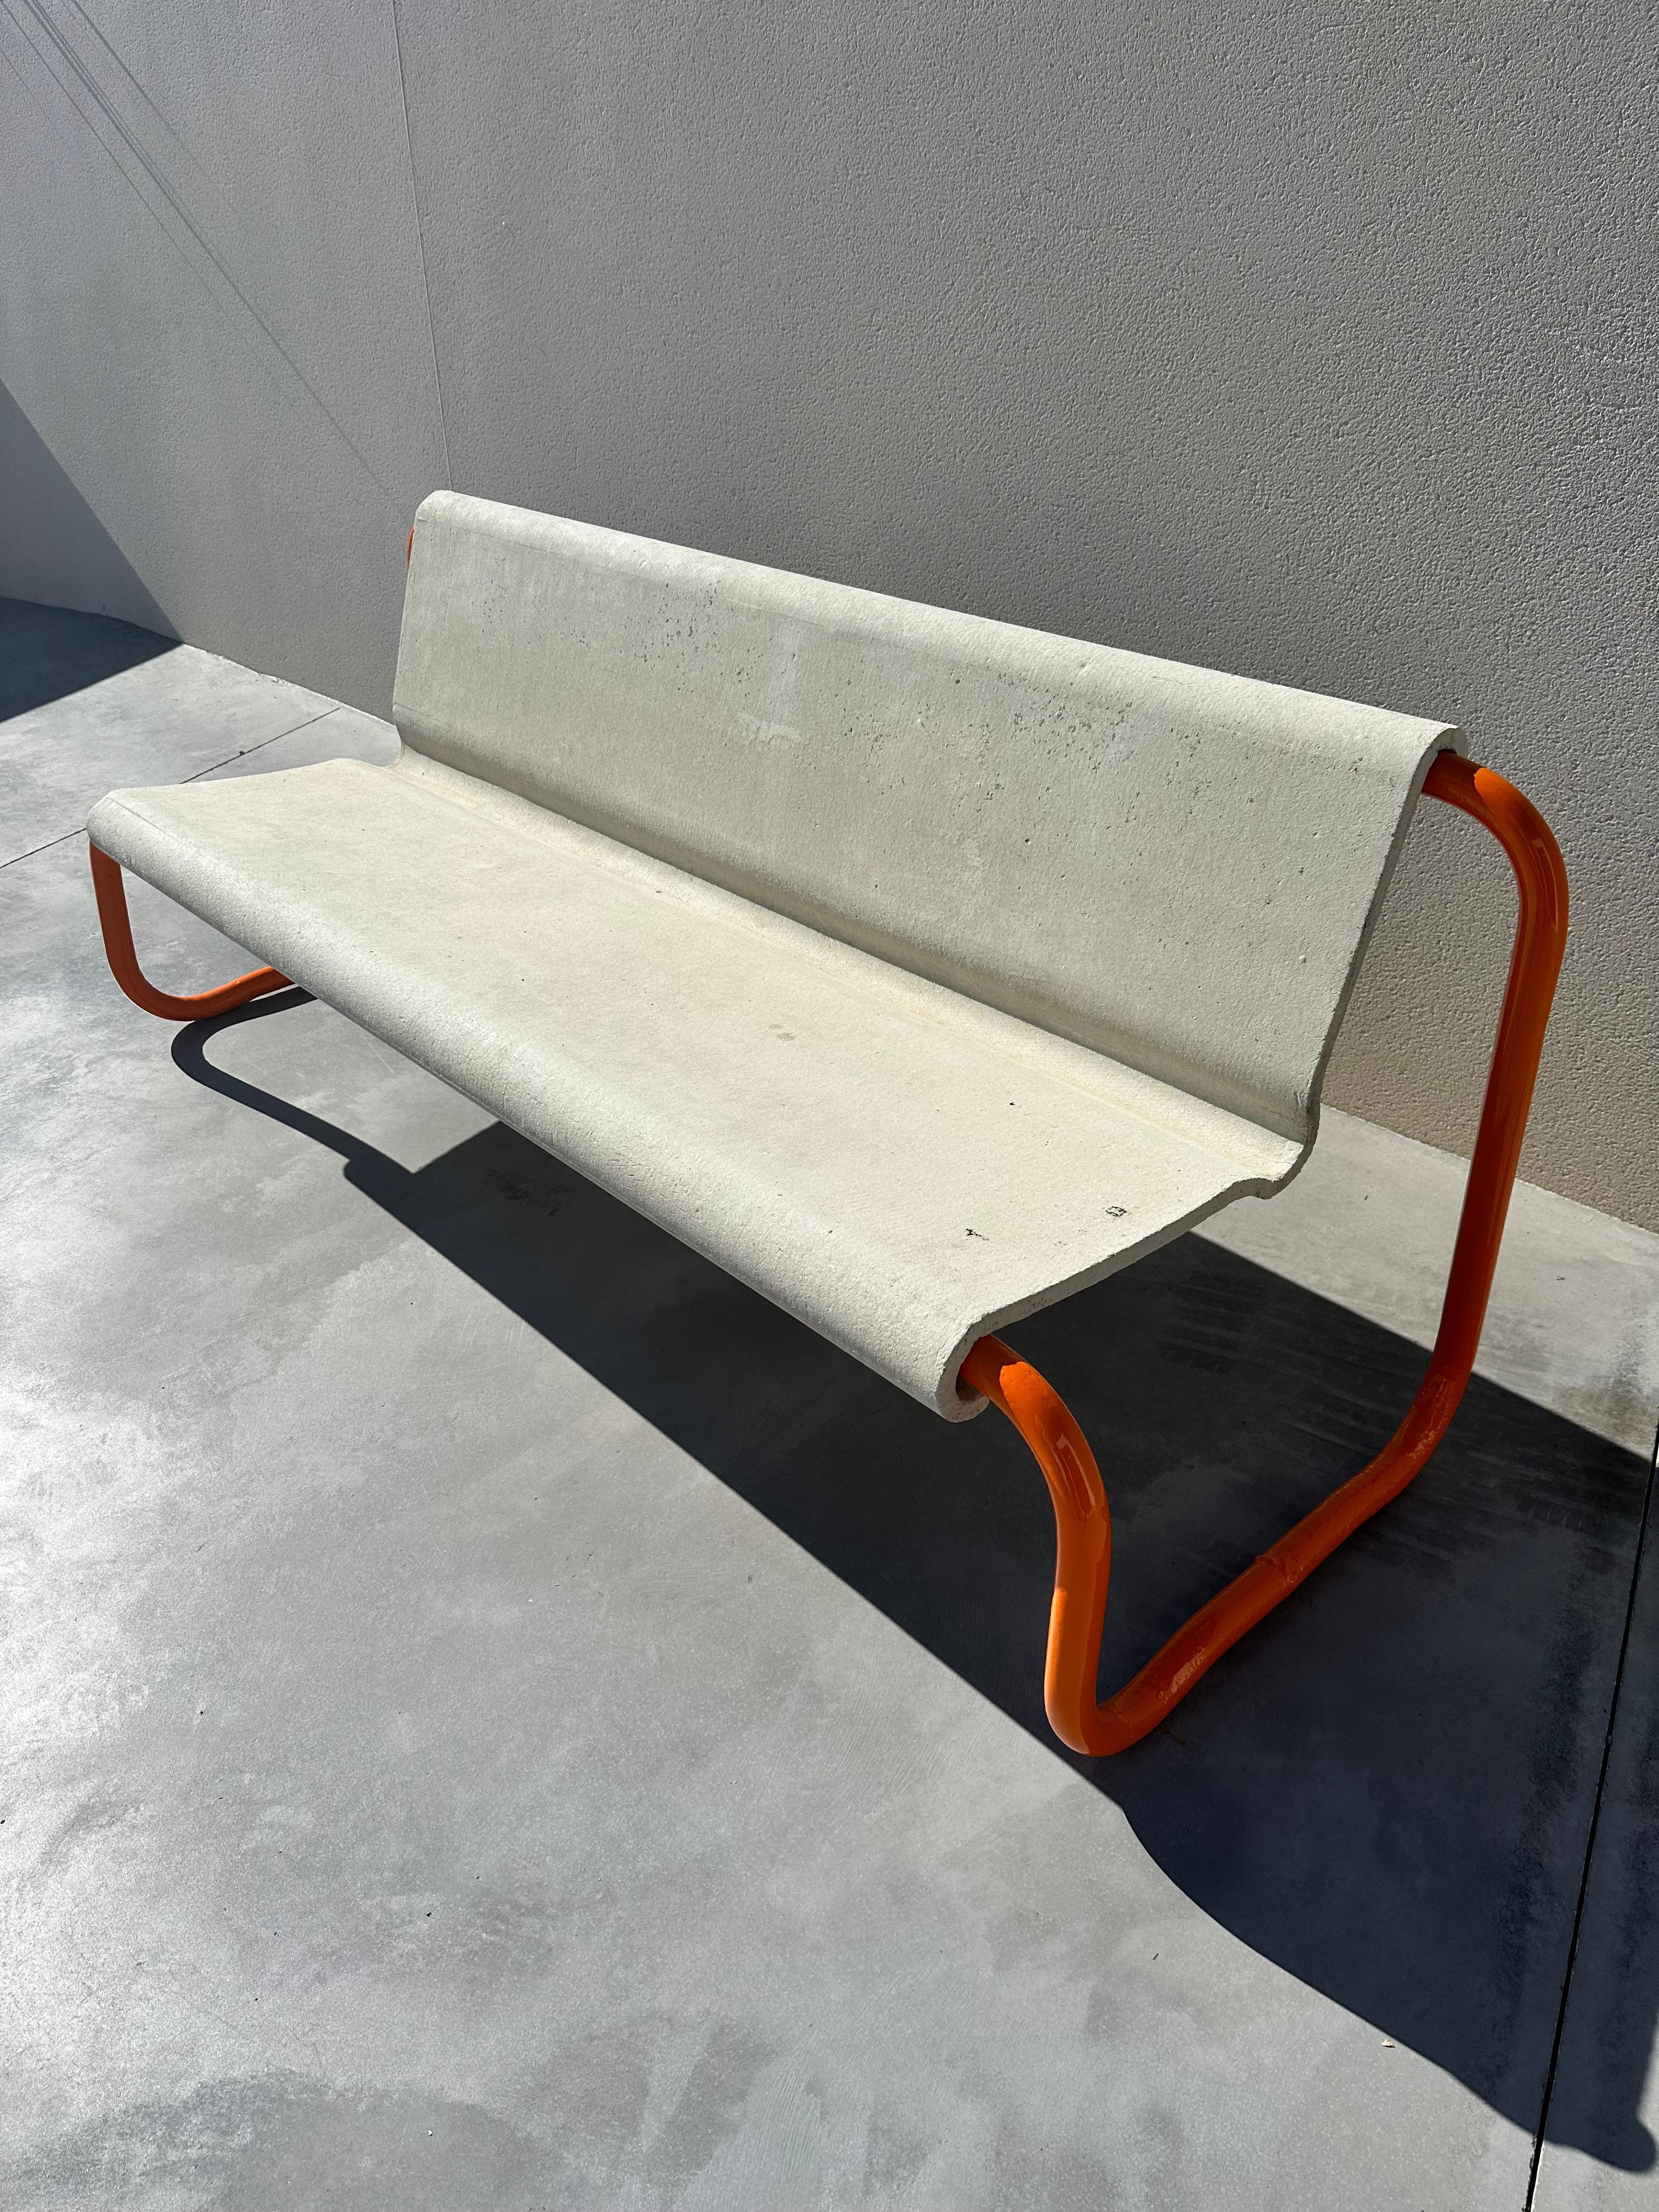 Willy Guhl Steel and Concrete Design Bench, Switzerland, 1950s For Sale 2